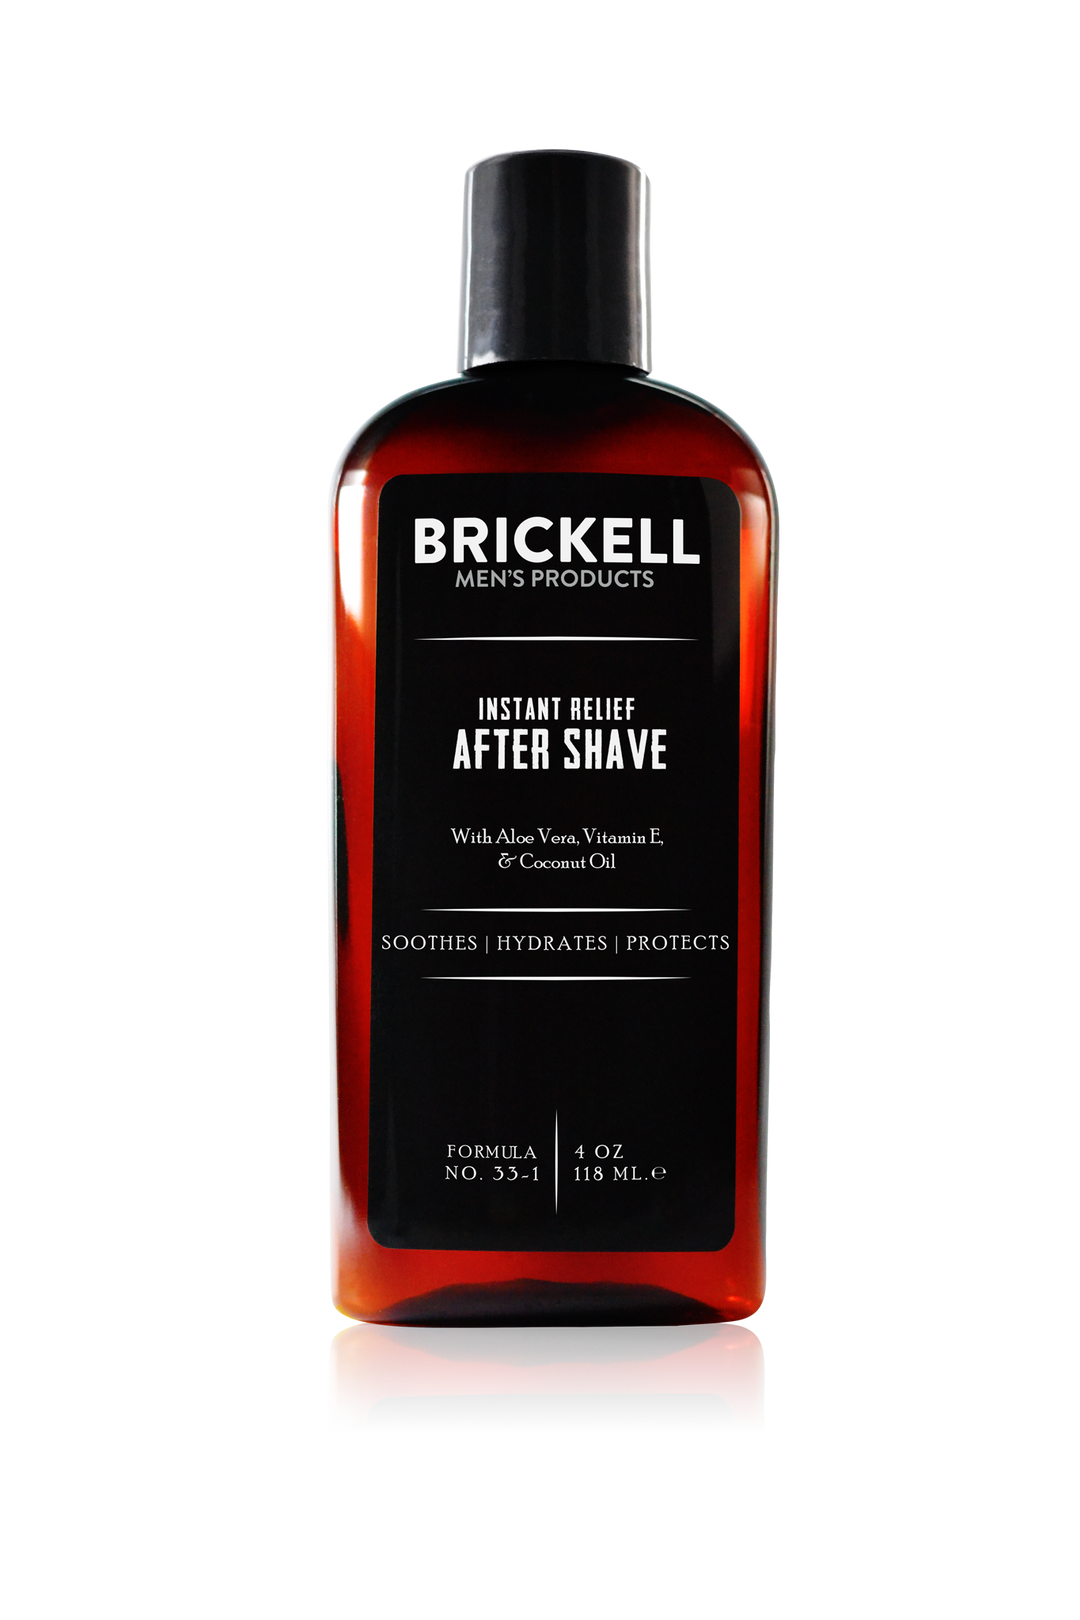 Brickell Men's Products Instant Relief Aftershave